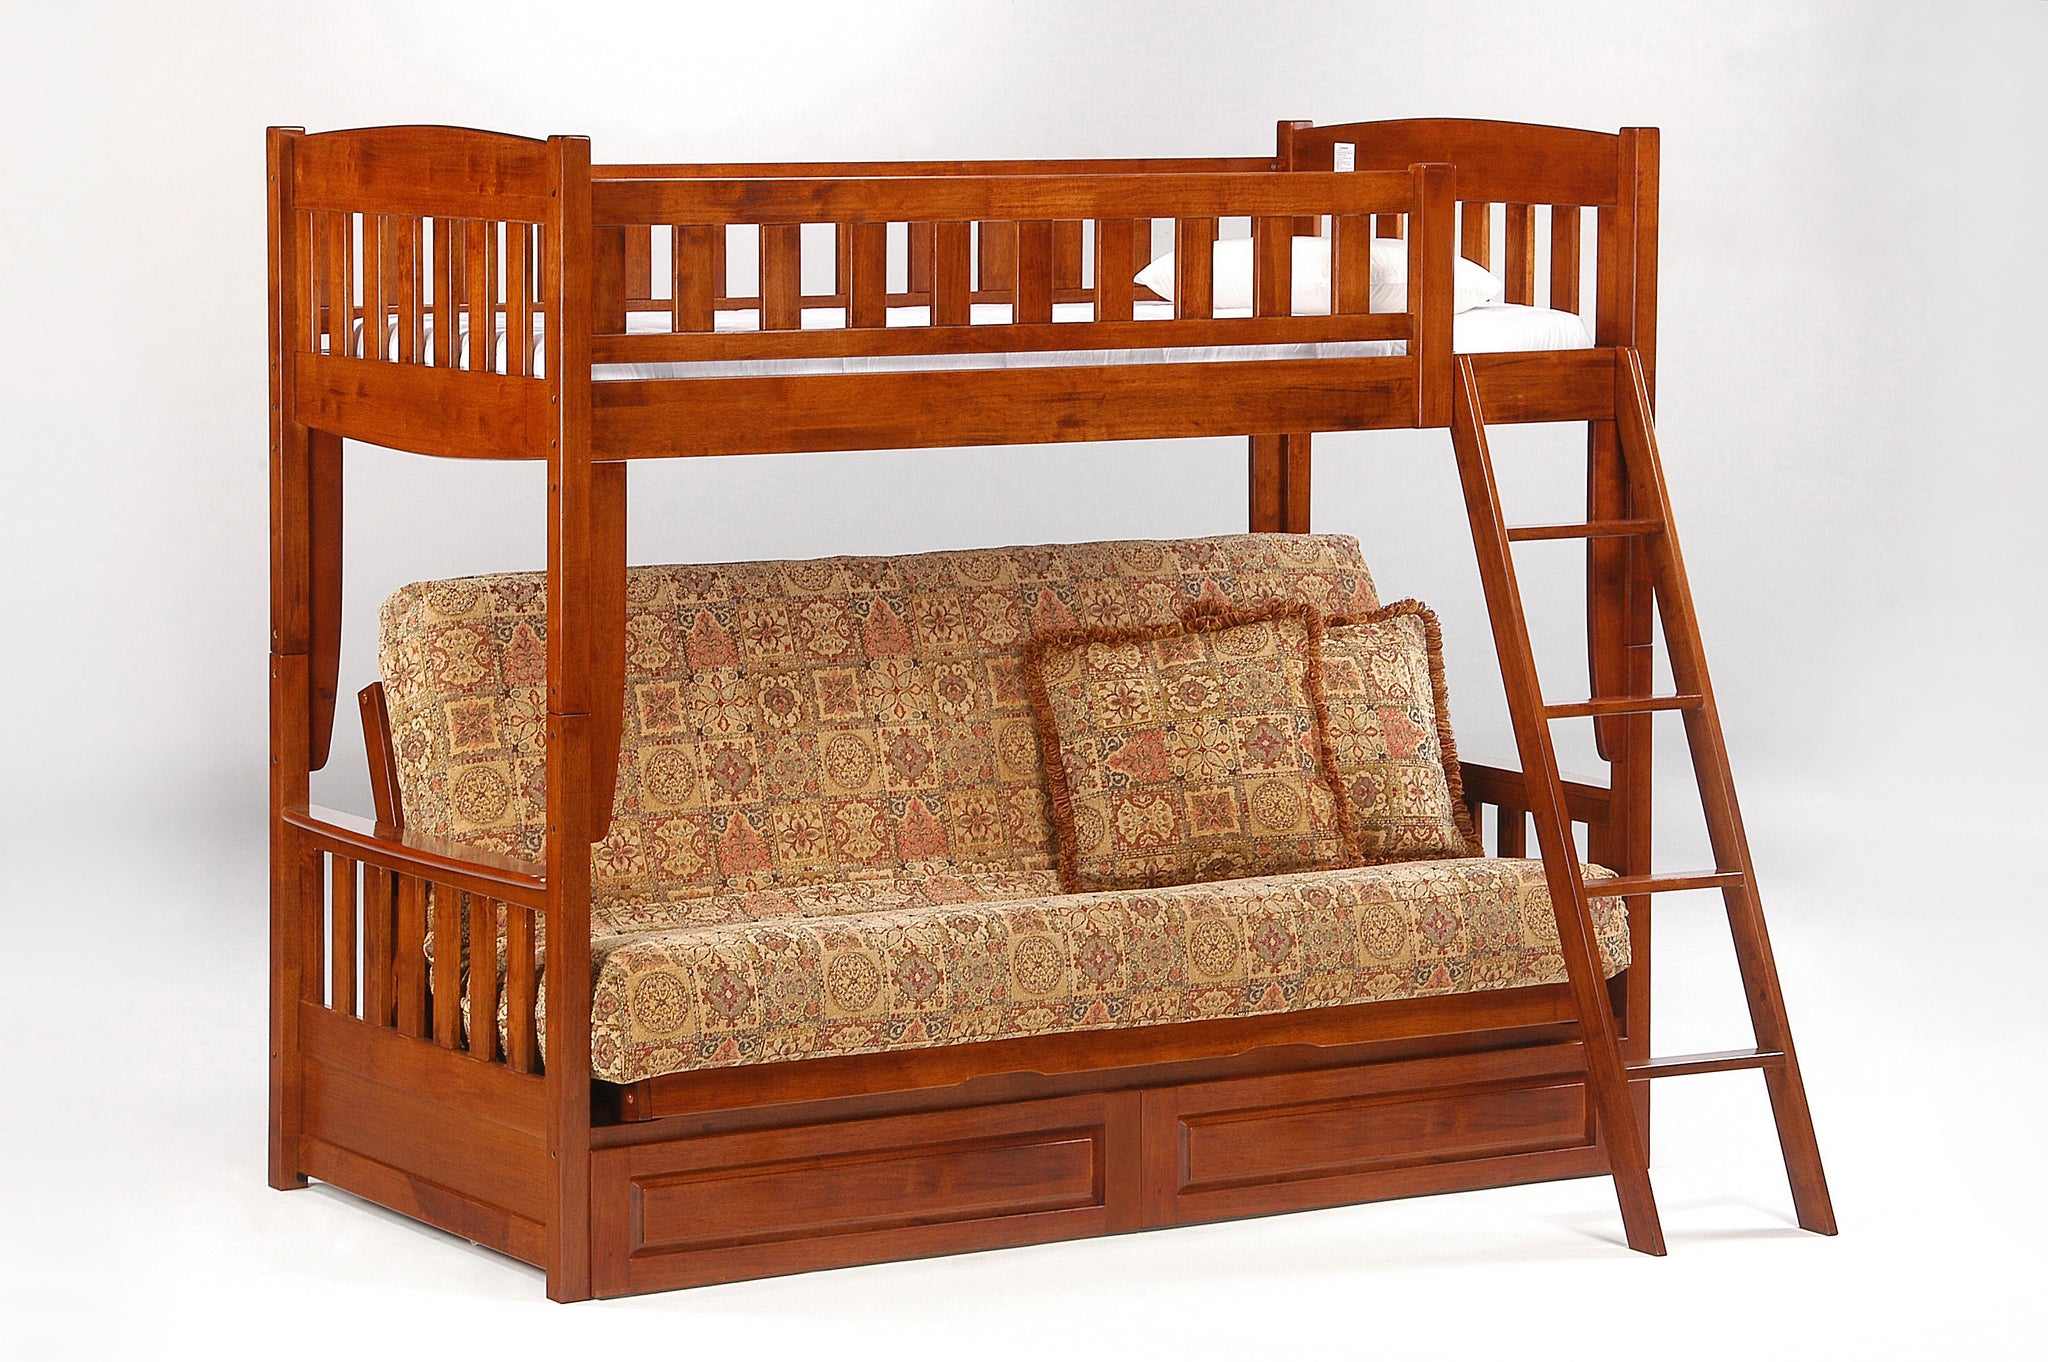 Cinnamon Futon Bunk Bed in Cherry Finish by Night & Day Furniture